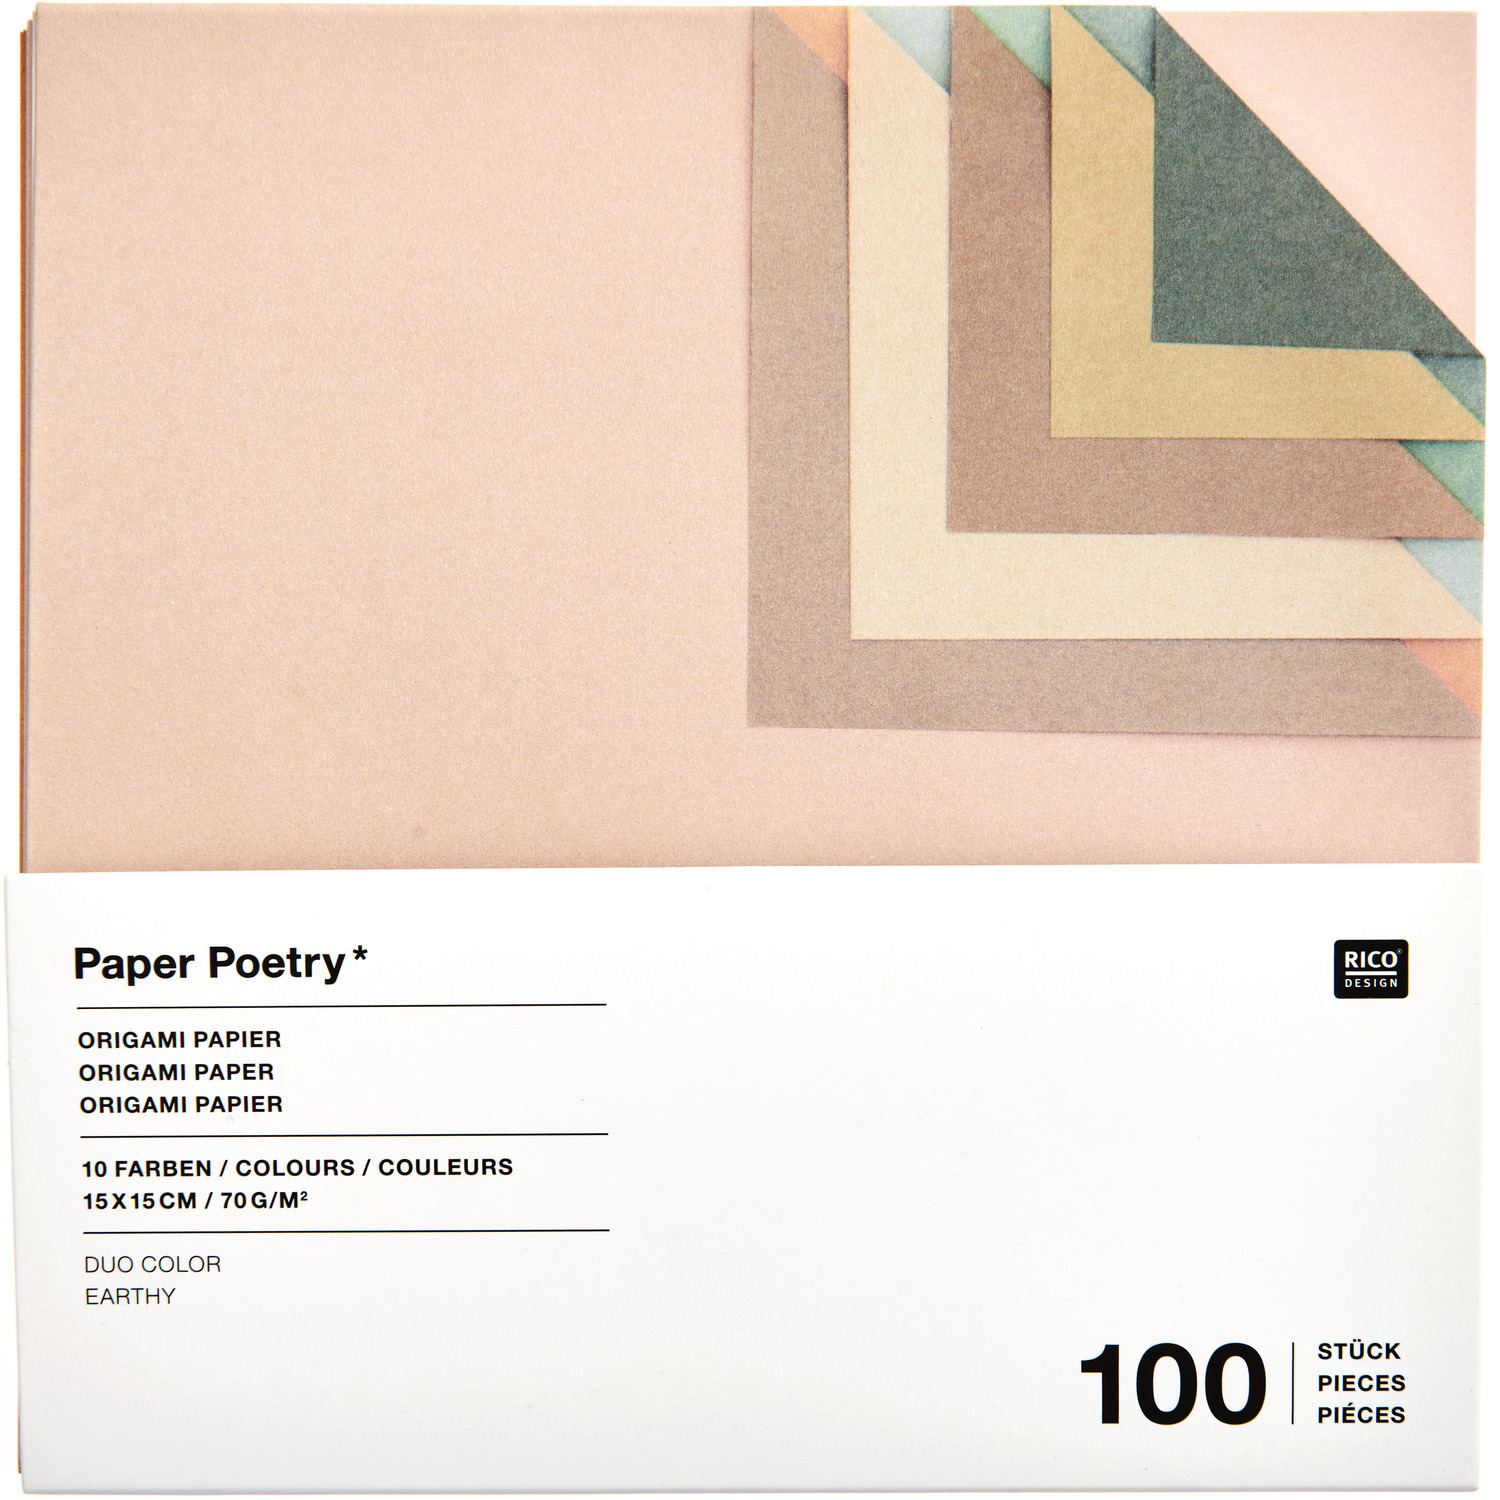 Paper Poetry Origami Duo color Earthy